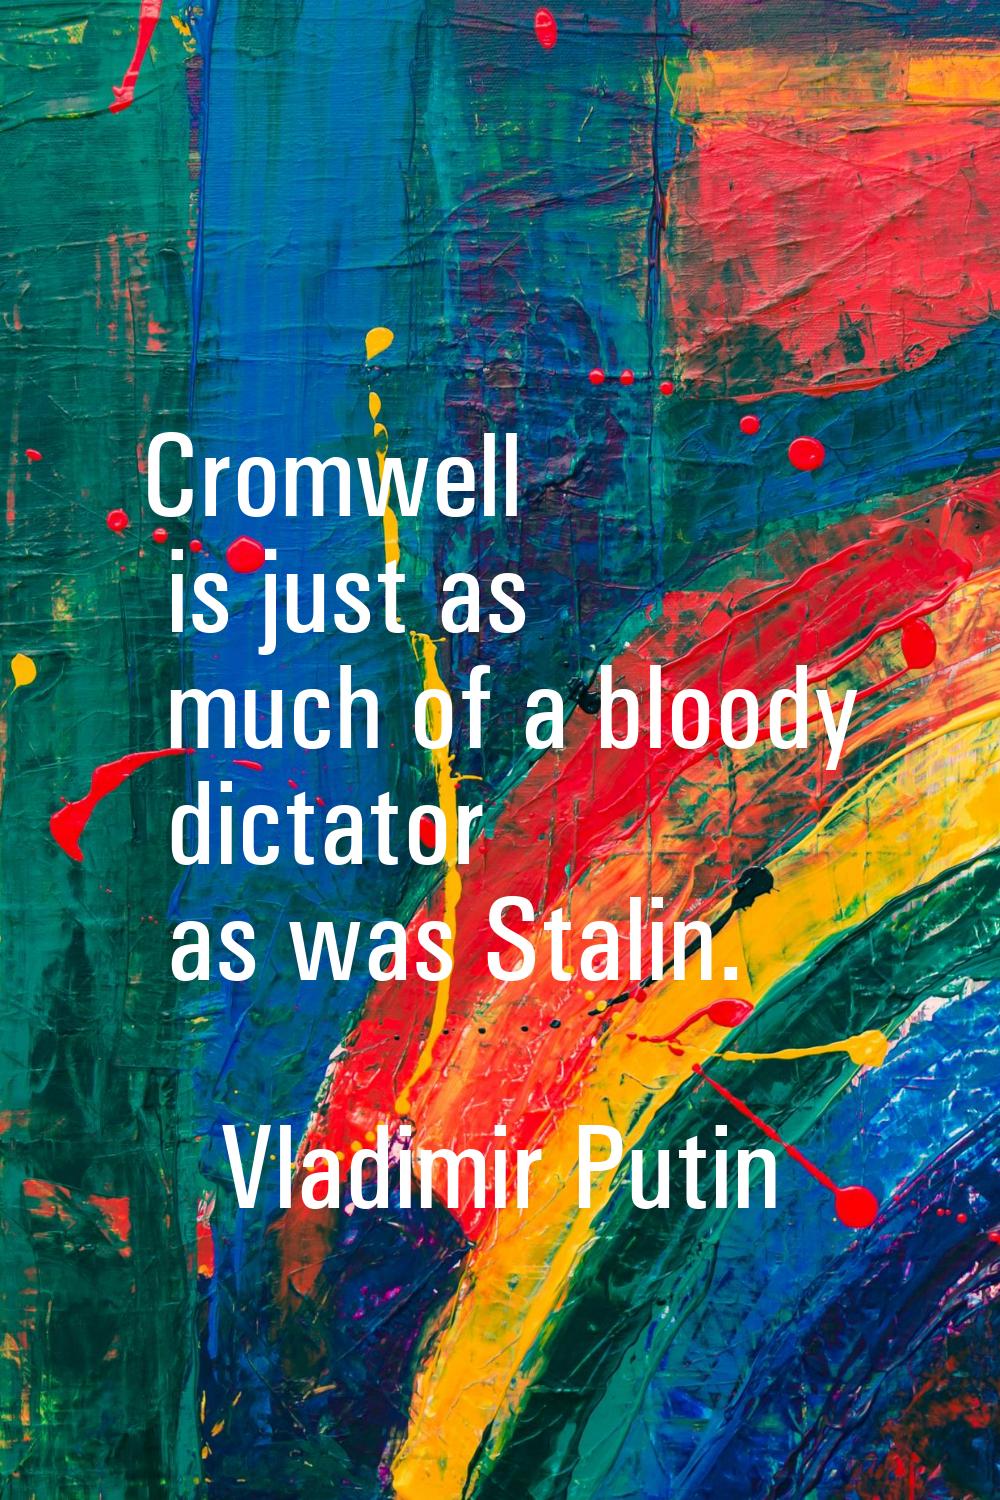 Cromwell is just as much of a bloody dictator as was Stalin.